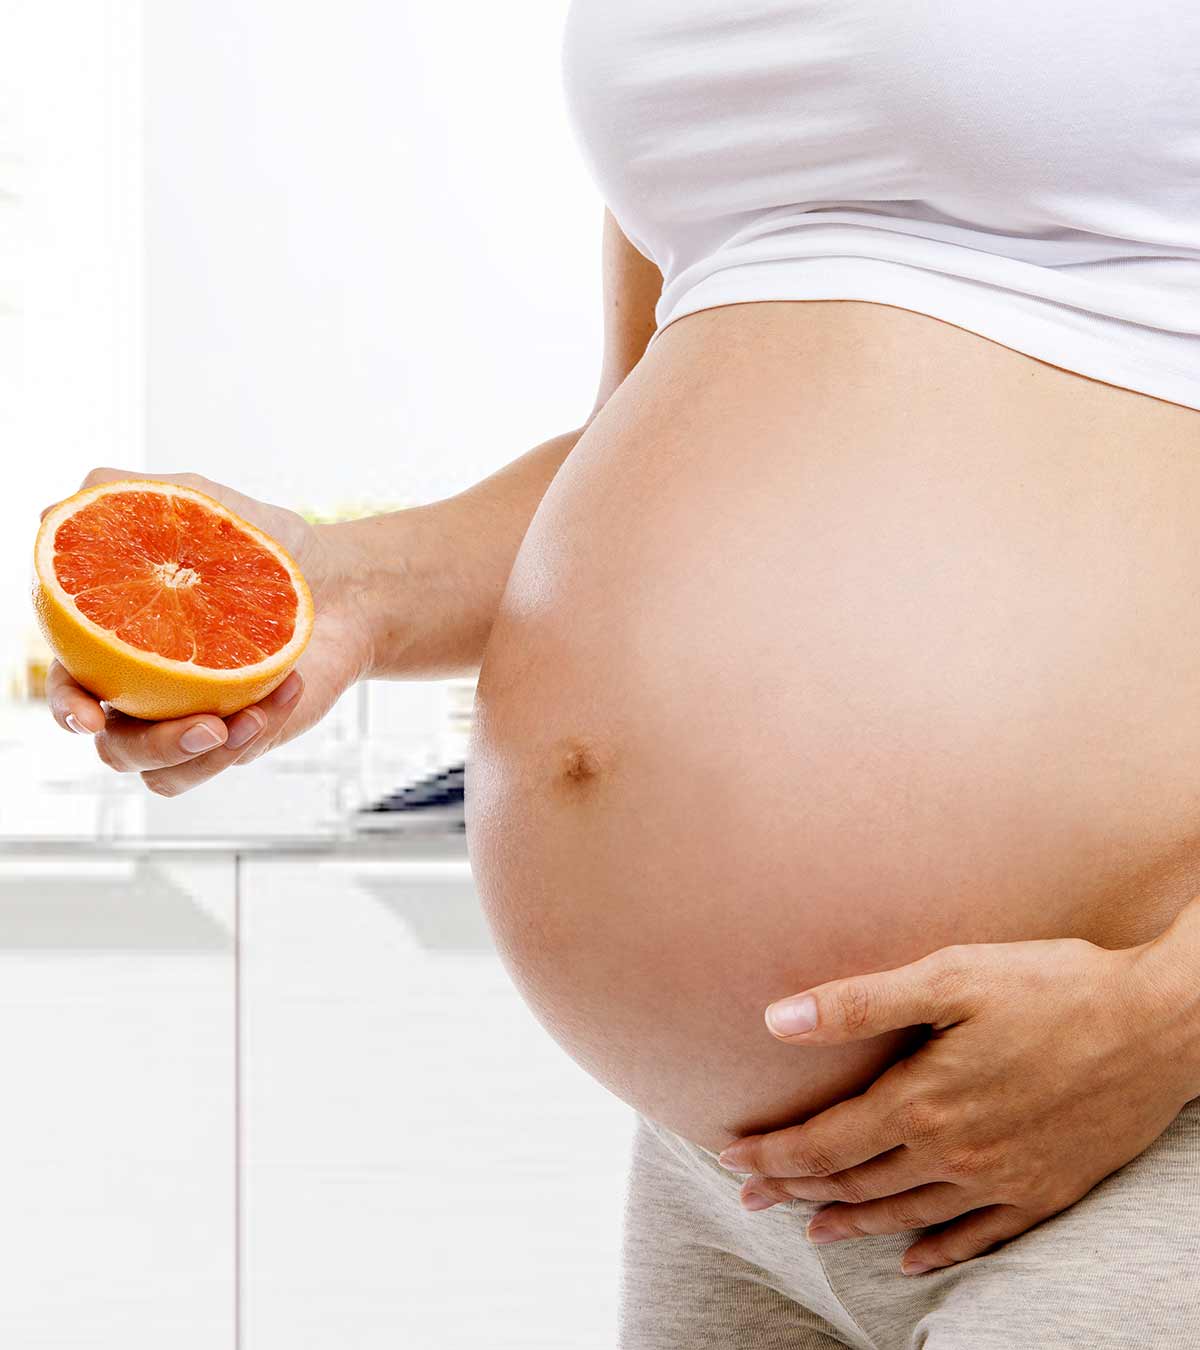 Can You Eat Grapefruit While Pregnant?